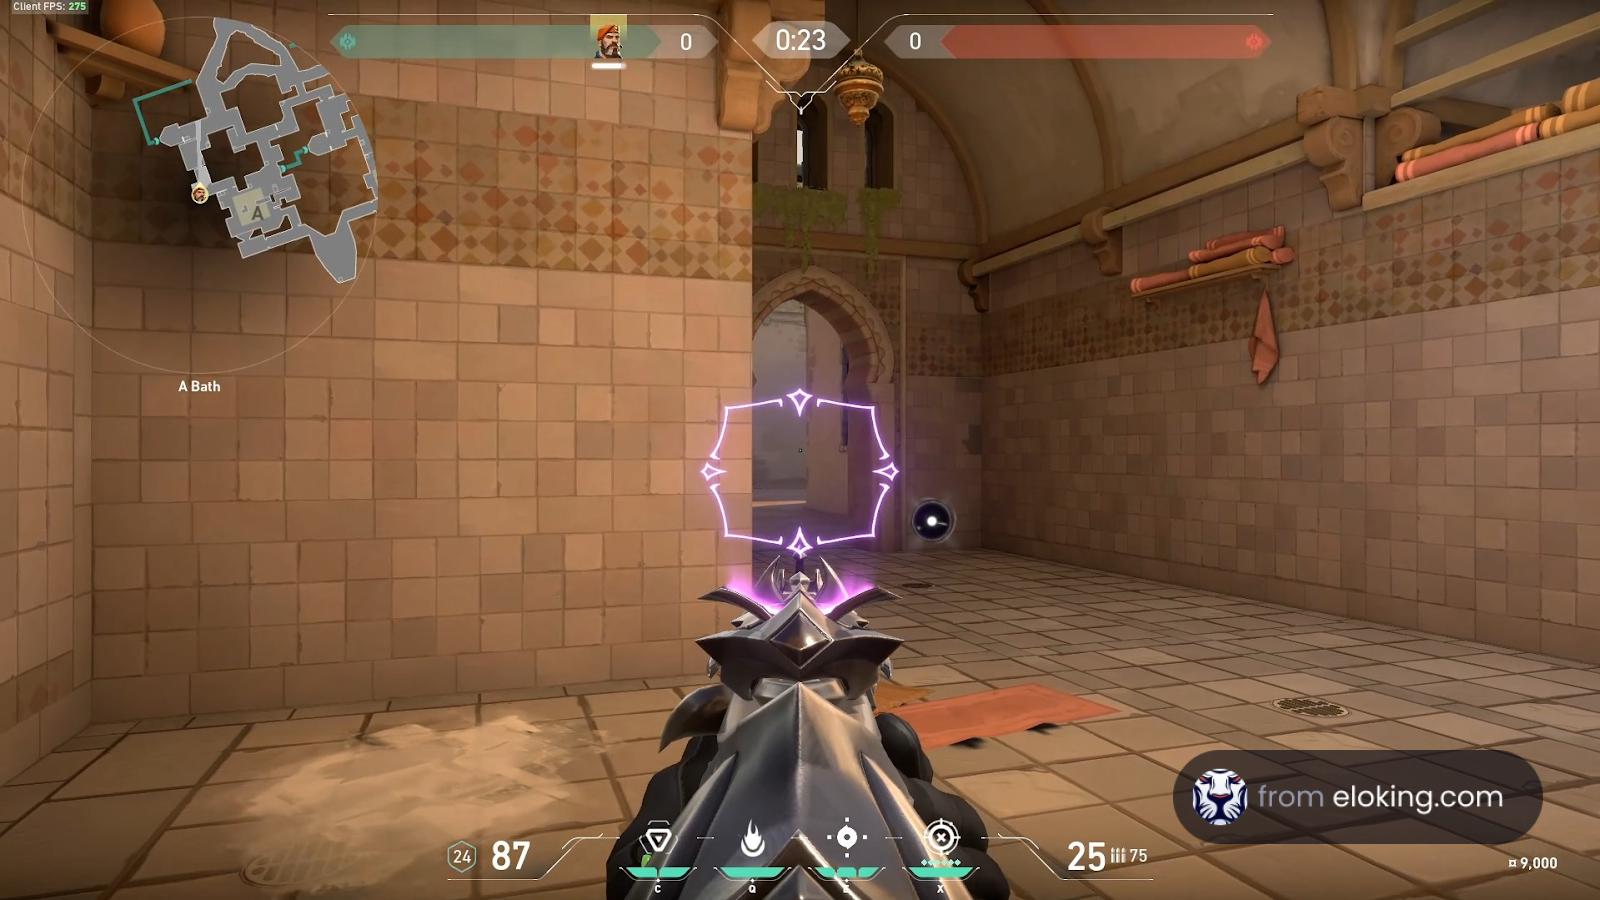 Player holding a pistol in a virtual shooting range with a score display